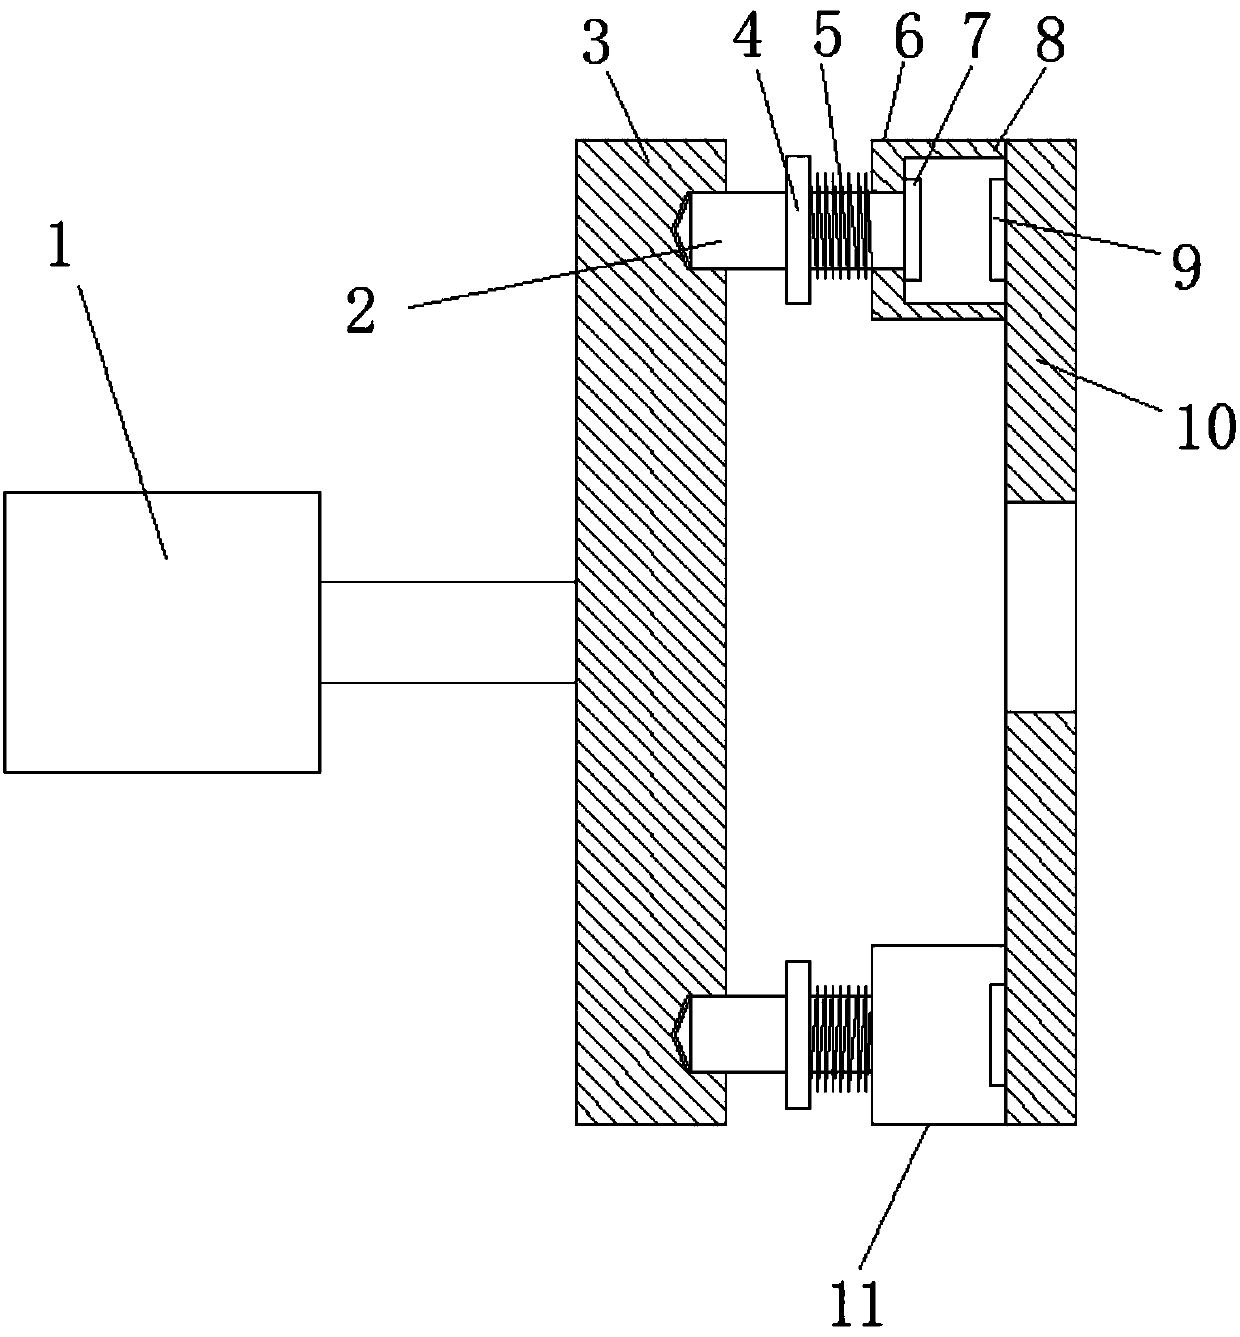 A motor rotation positioning structure and kitchen waste disposer